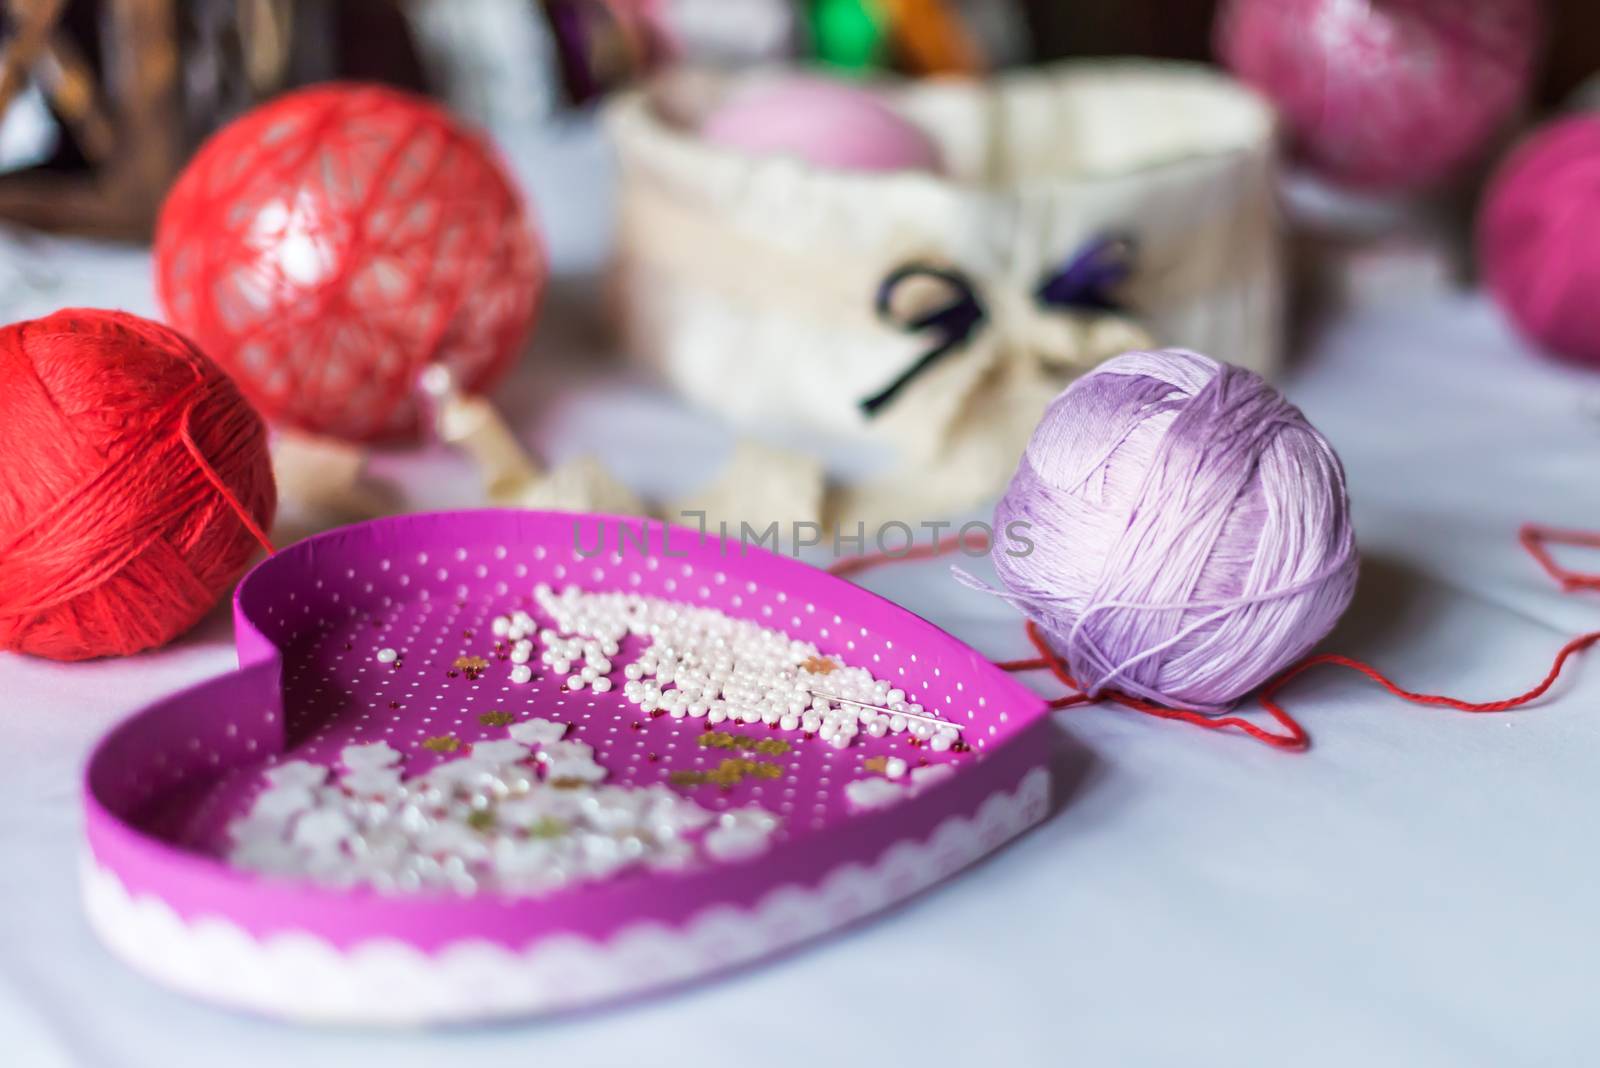 decorations in the shape of heart and balls of yarn are on a white tablecloth